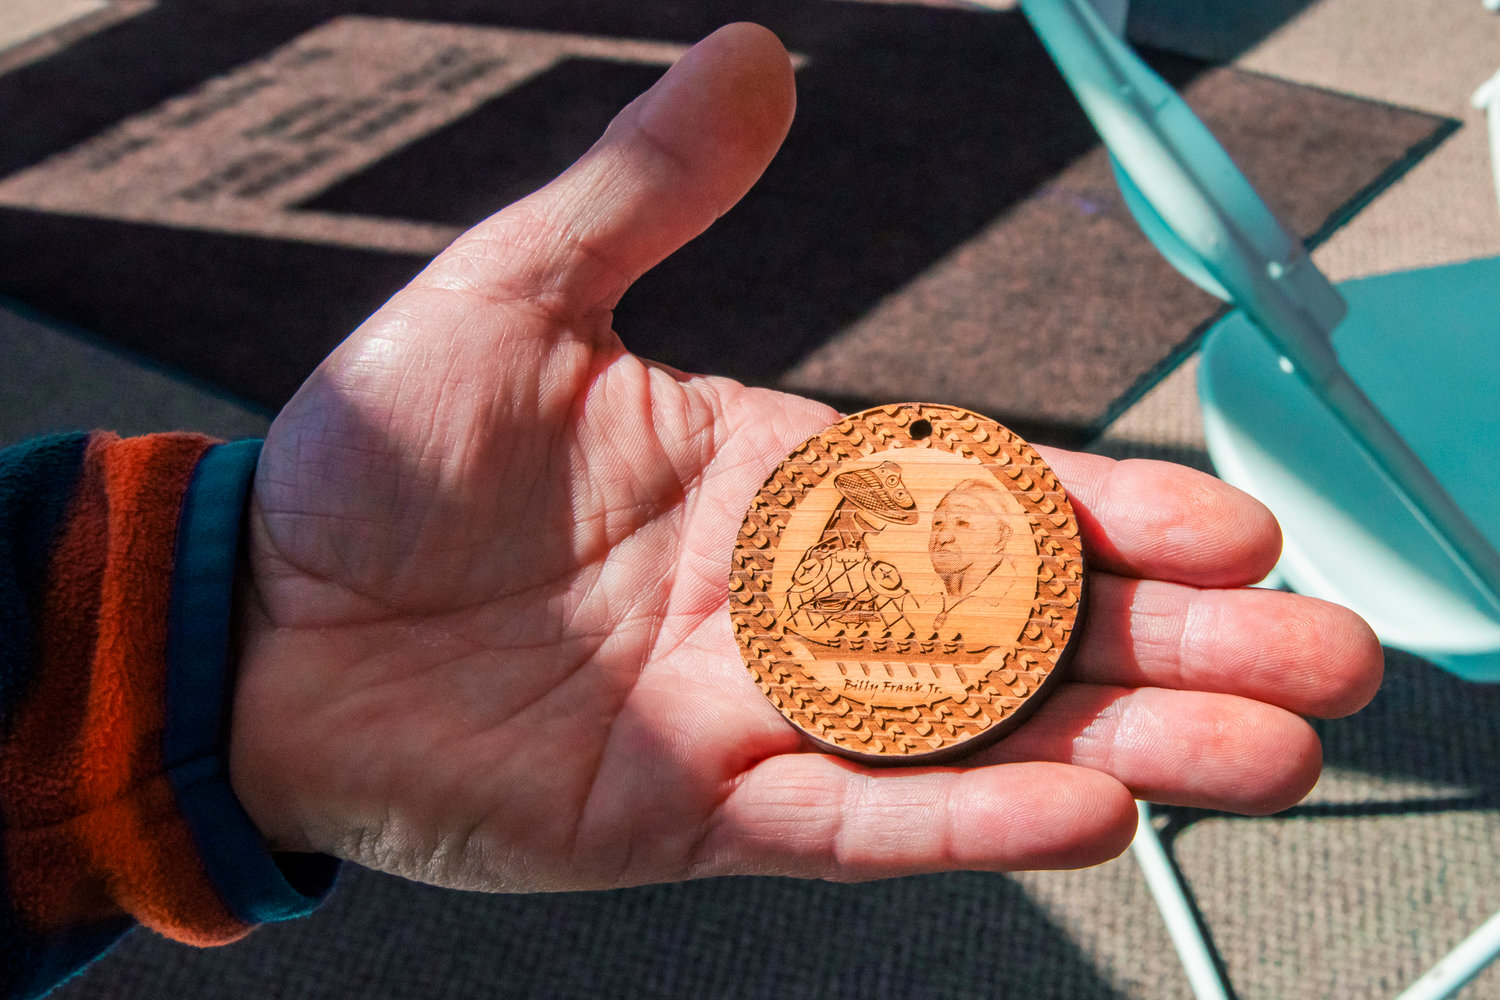 Kieth Brent, Senior Construction Project Manager with the Nisqually Tribe, holds a wooden medallion depicting Billy Frank Jr. Wednesday at the Wa-He-Lute Indian School.